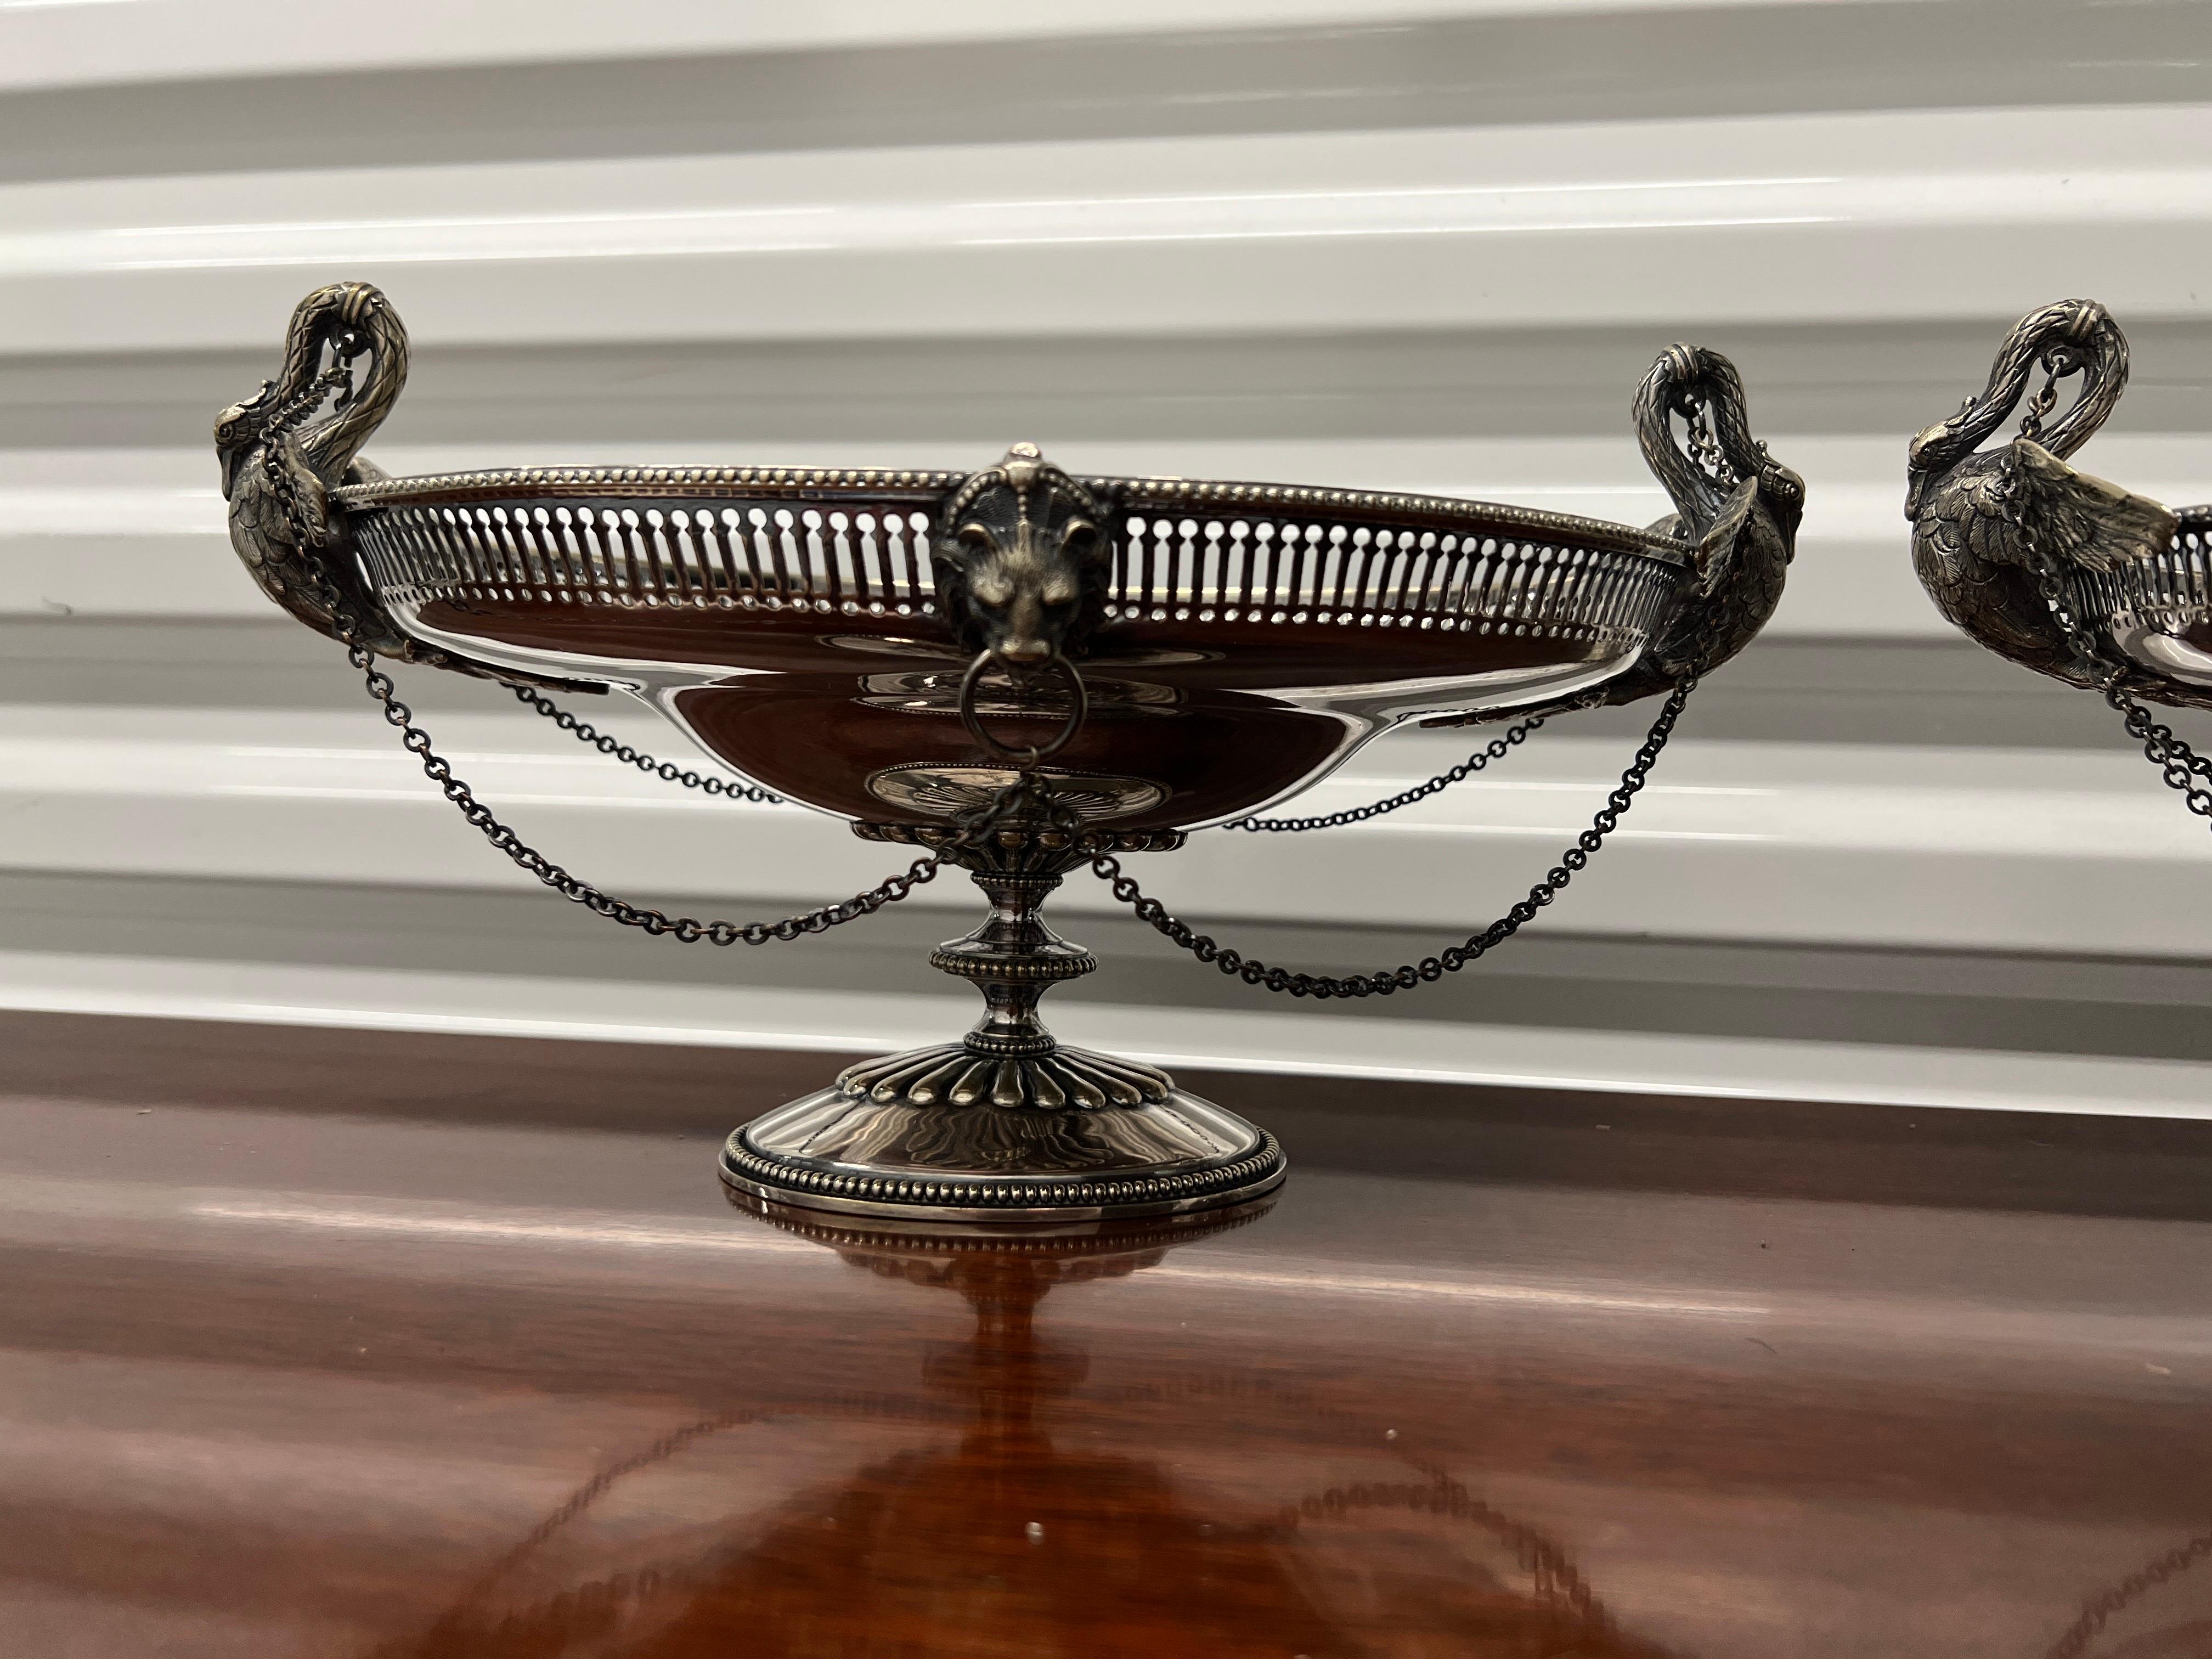 English, circa 1862.

A pair of good quality antique Sheffield made silverplate pedestal baskets. Each basket has a pierced frame, lion head mounts to front and verso and flanked by swan motif handles to either side. A strange and unique series of